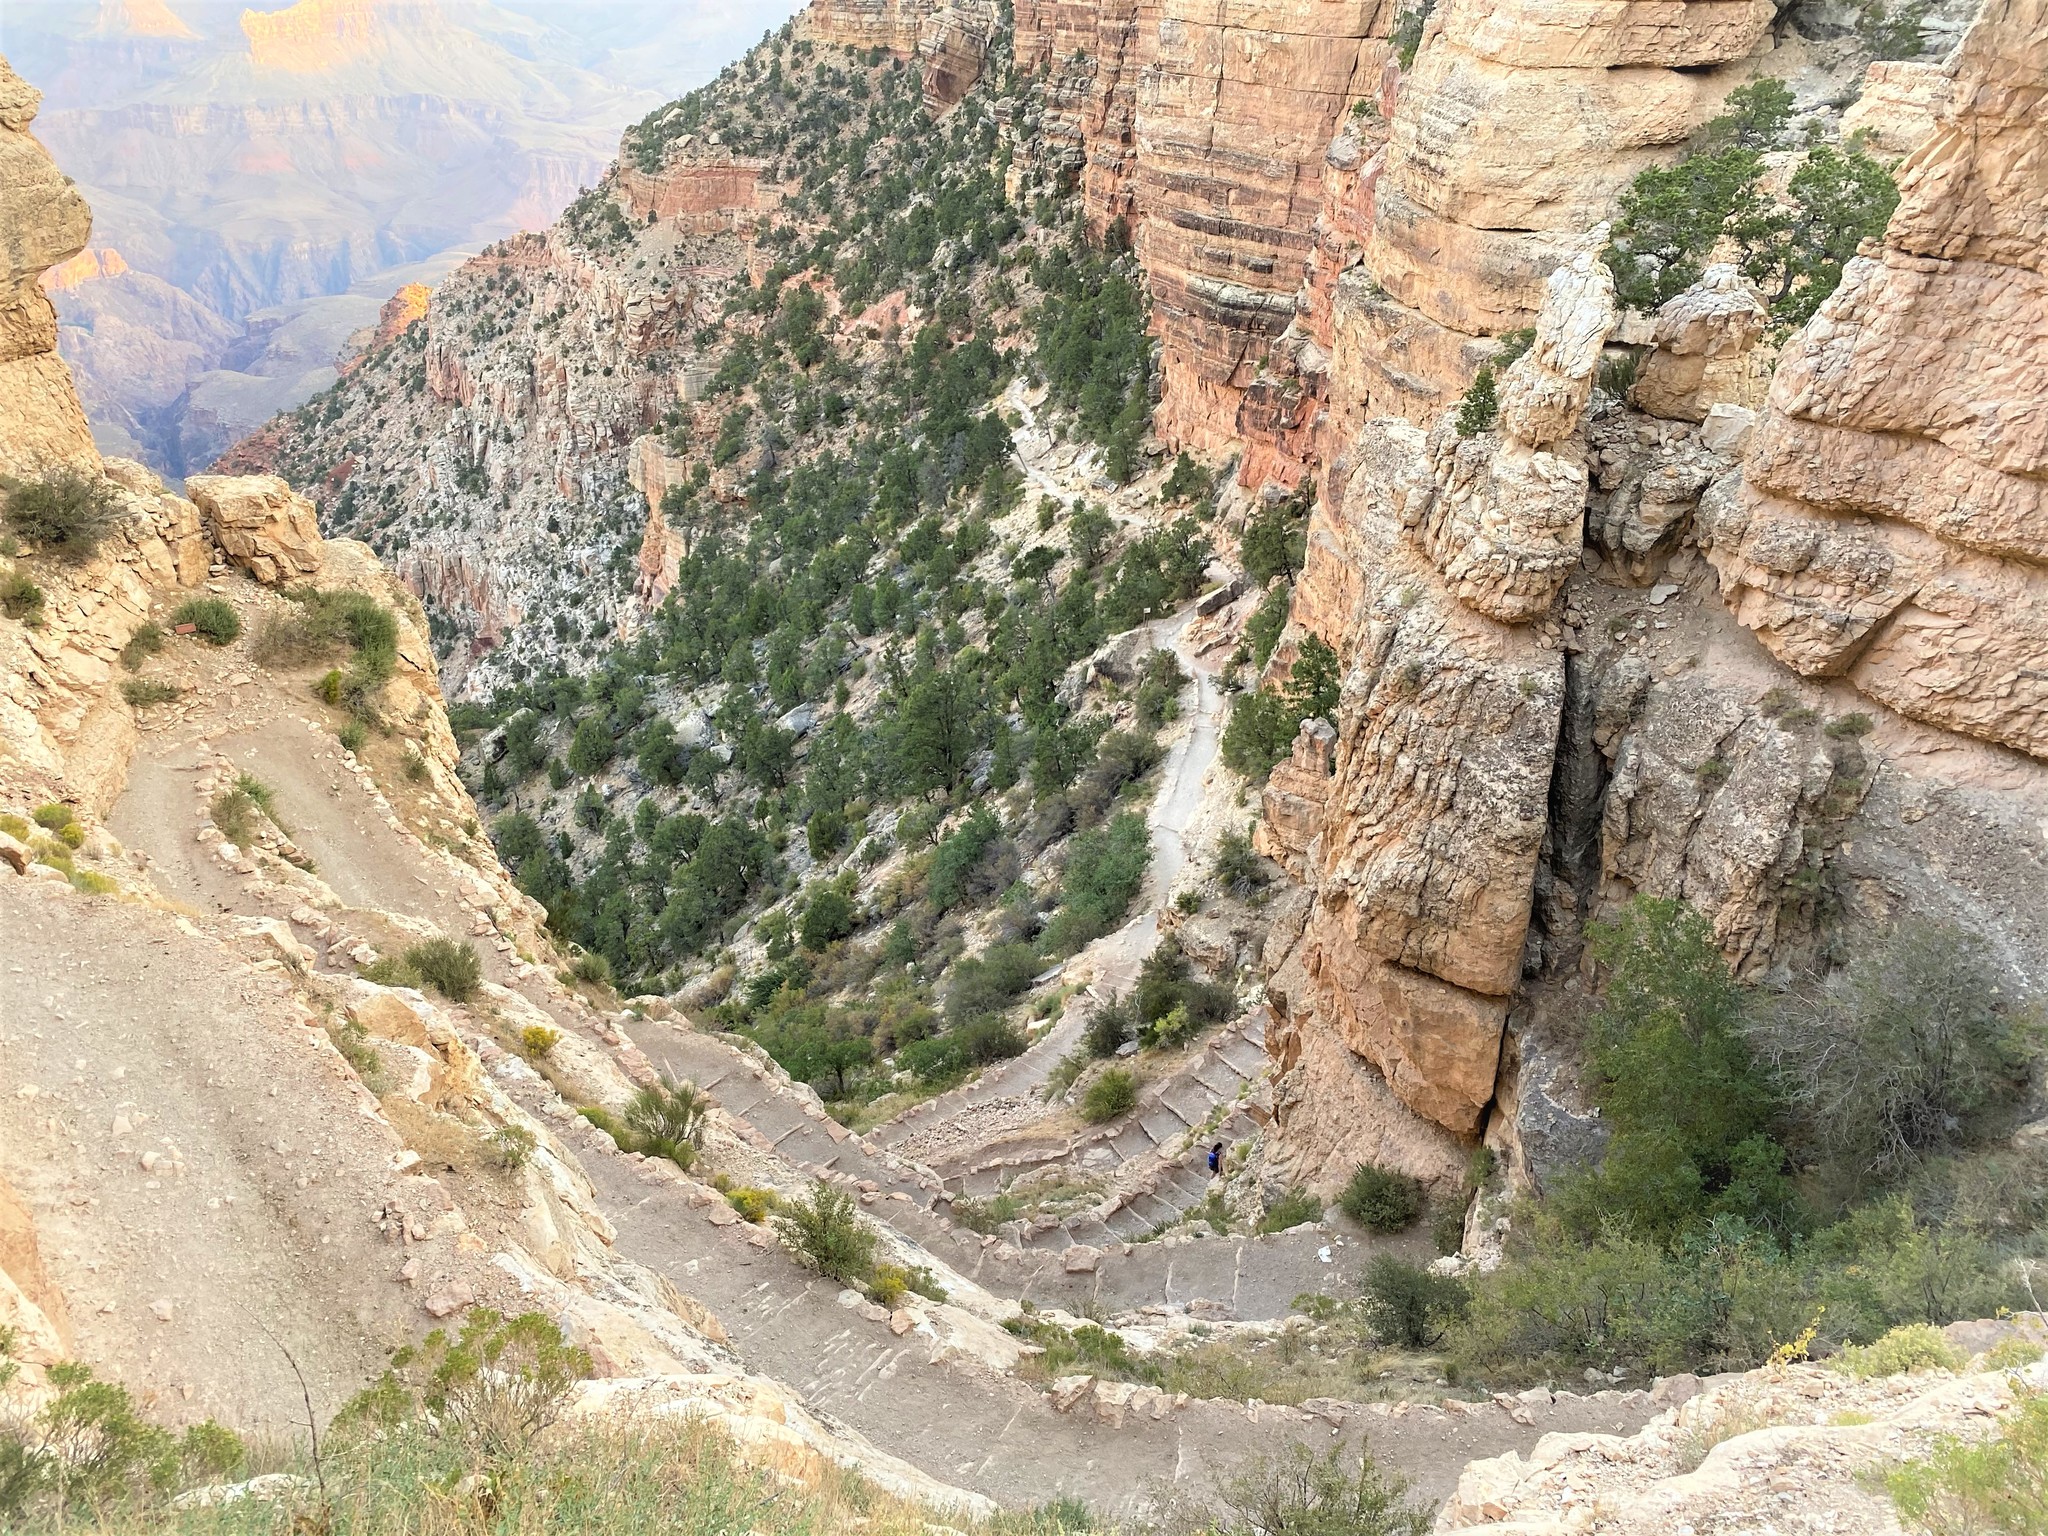 switchbacks dropping down a steep canyon